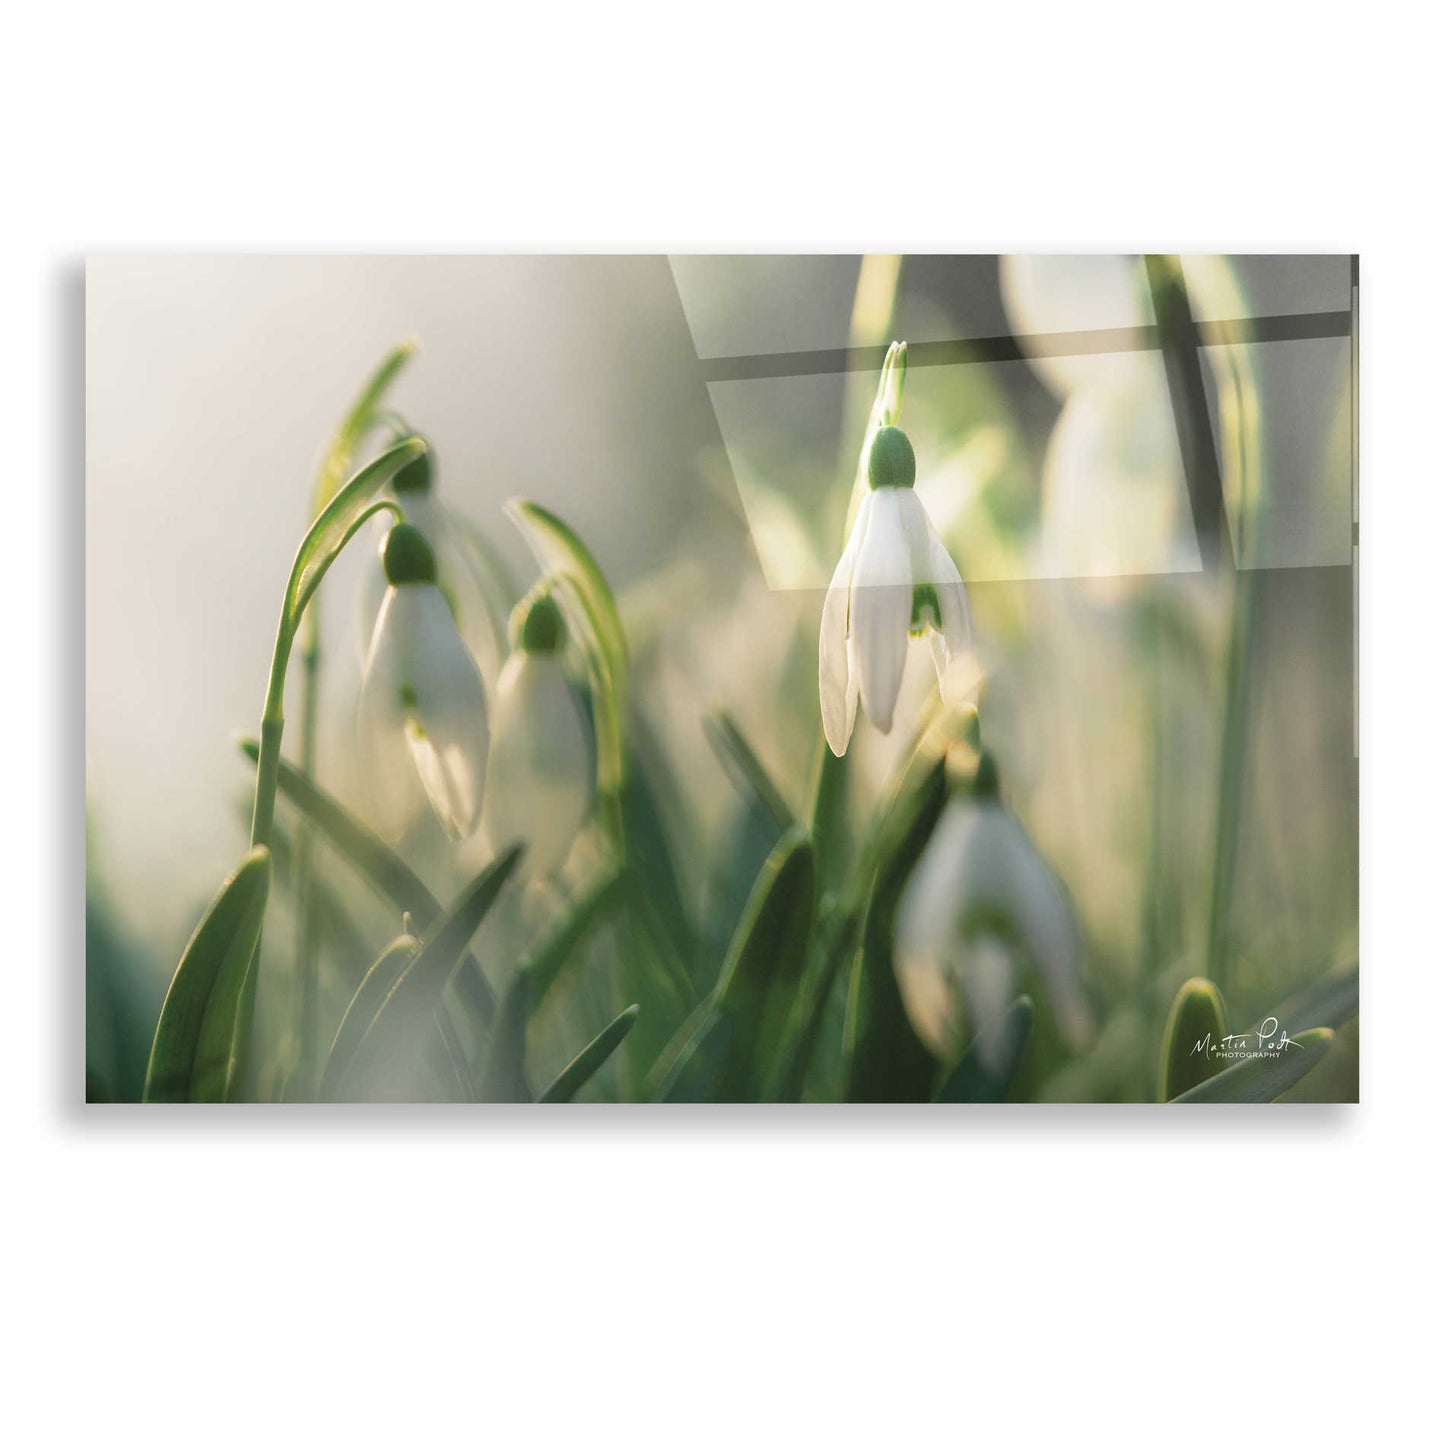 Epic Art 'Snowdrops' by Martin Podt, Acrylic Glass Wall Art,24x16